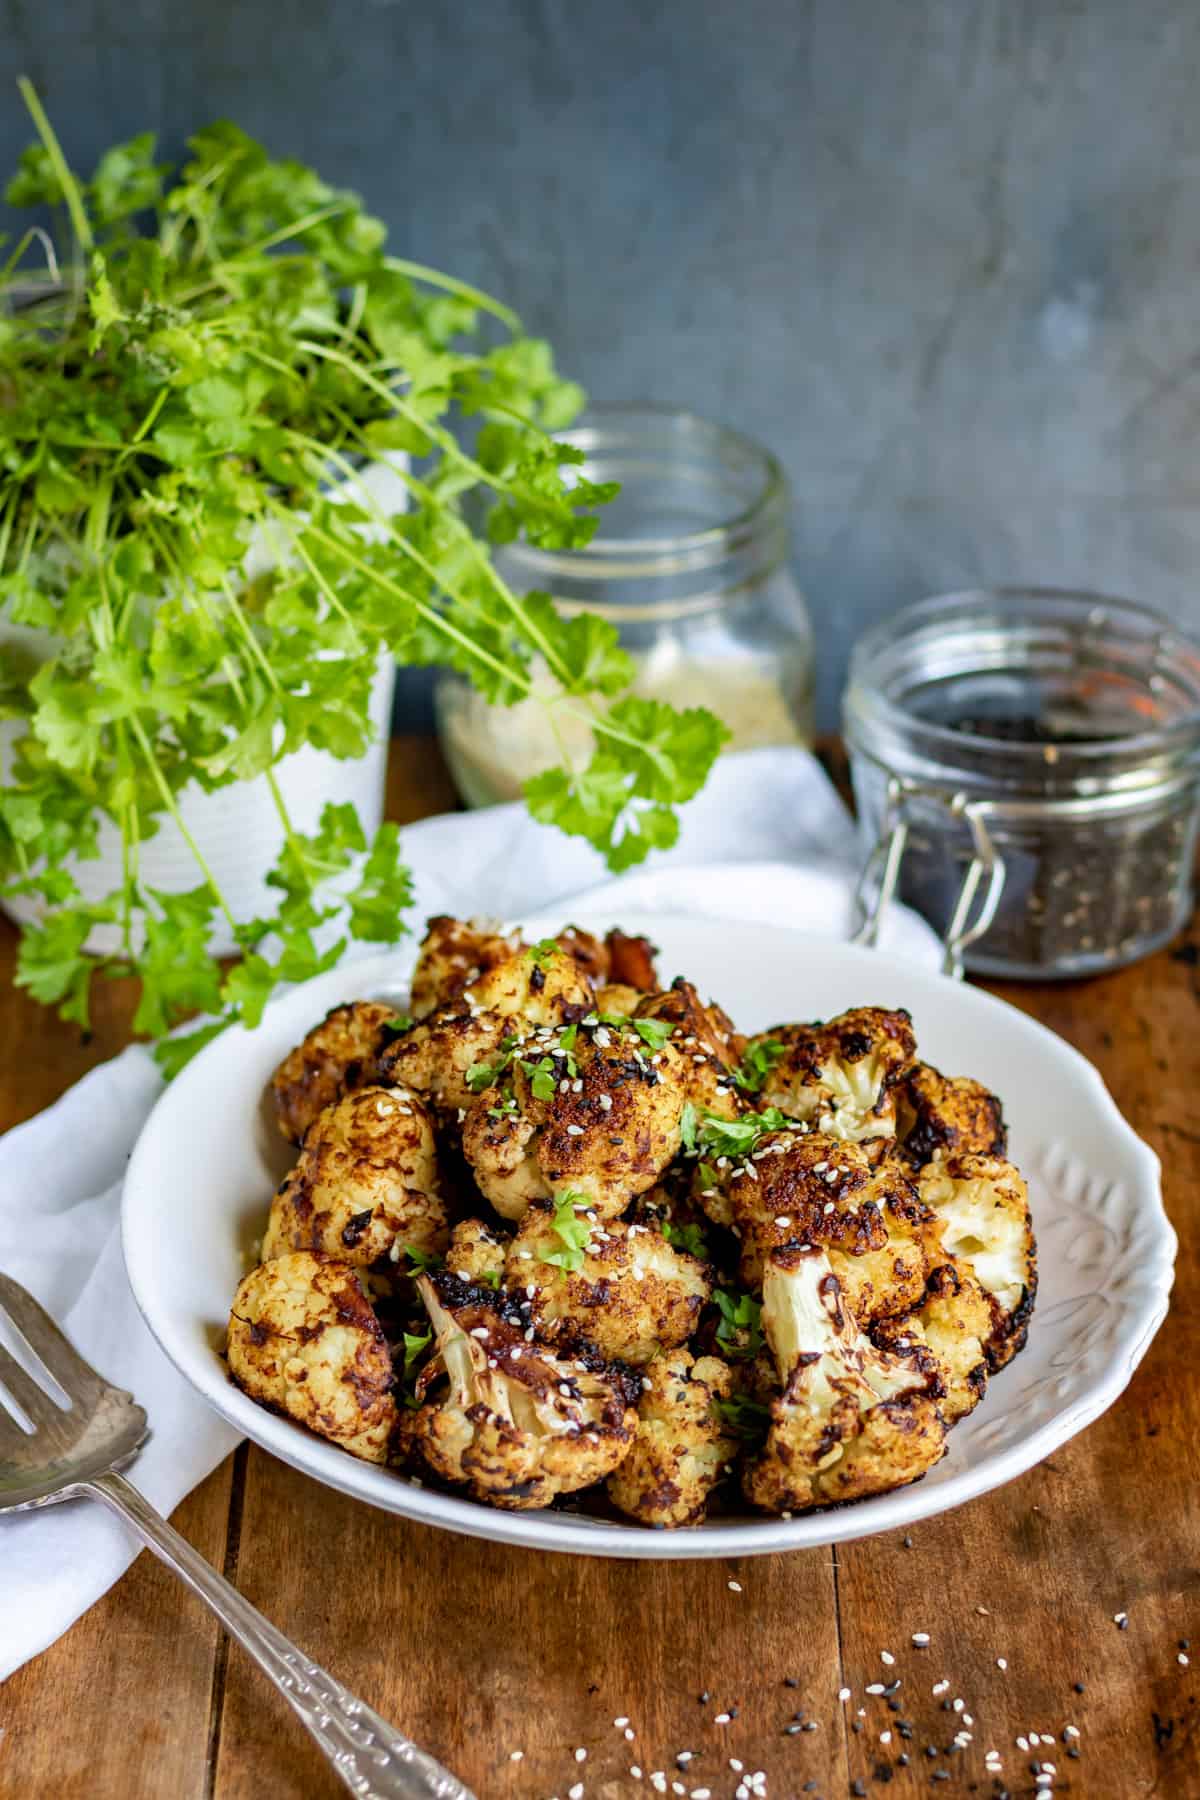 A table with a dish of roasted cauliflower, parsley and a jar of black sesame seeds.